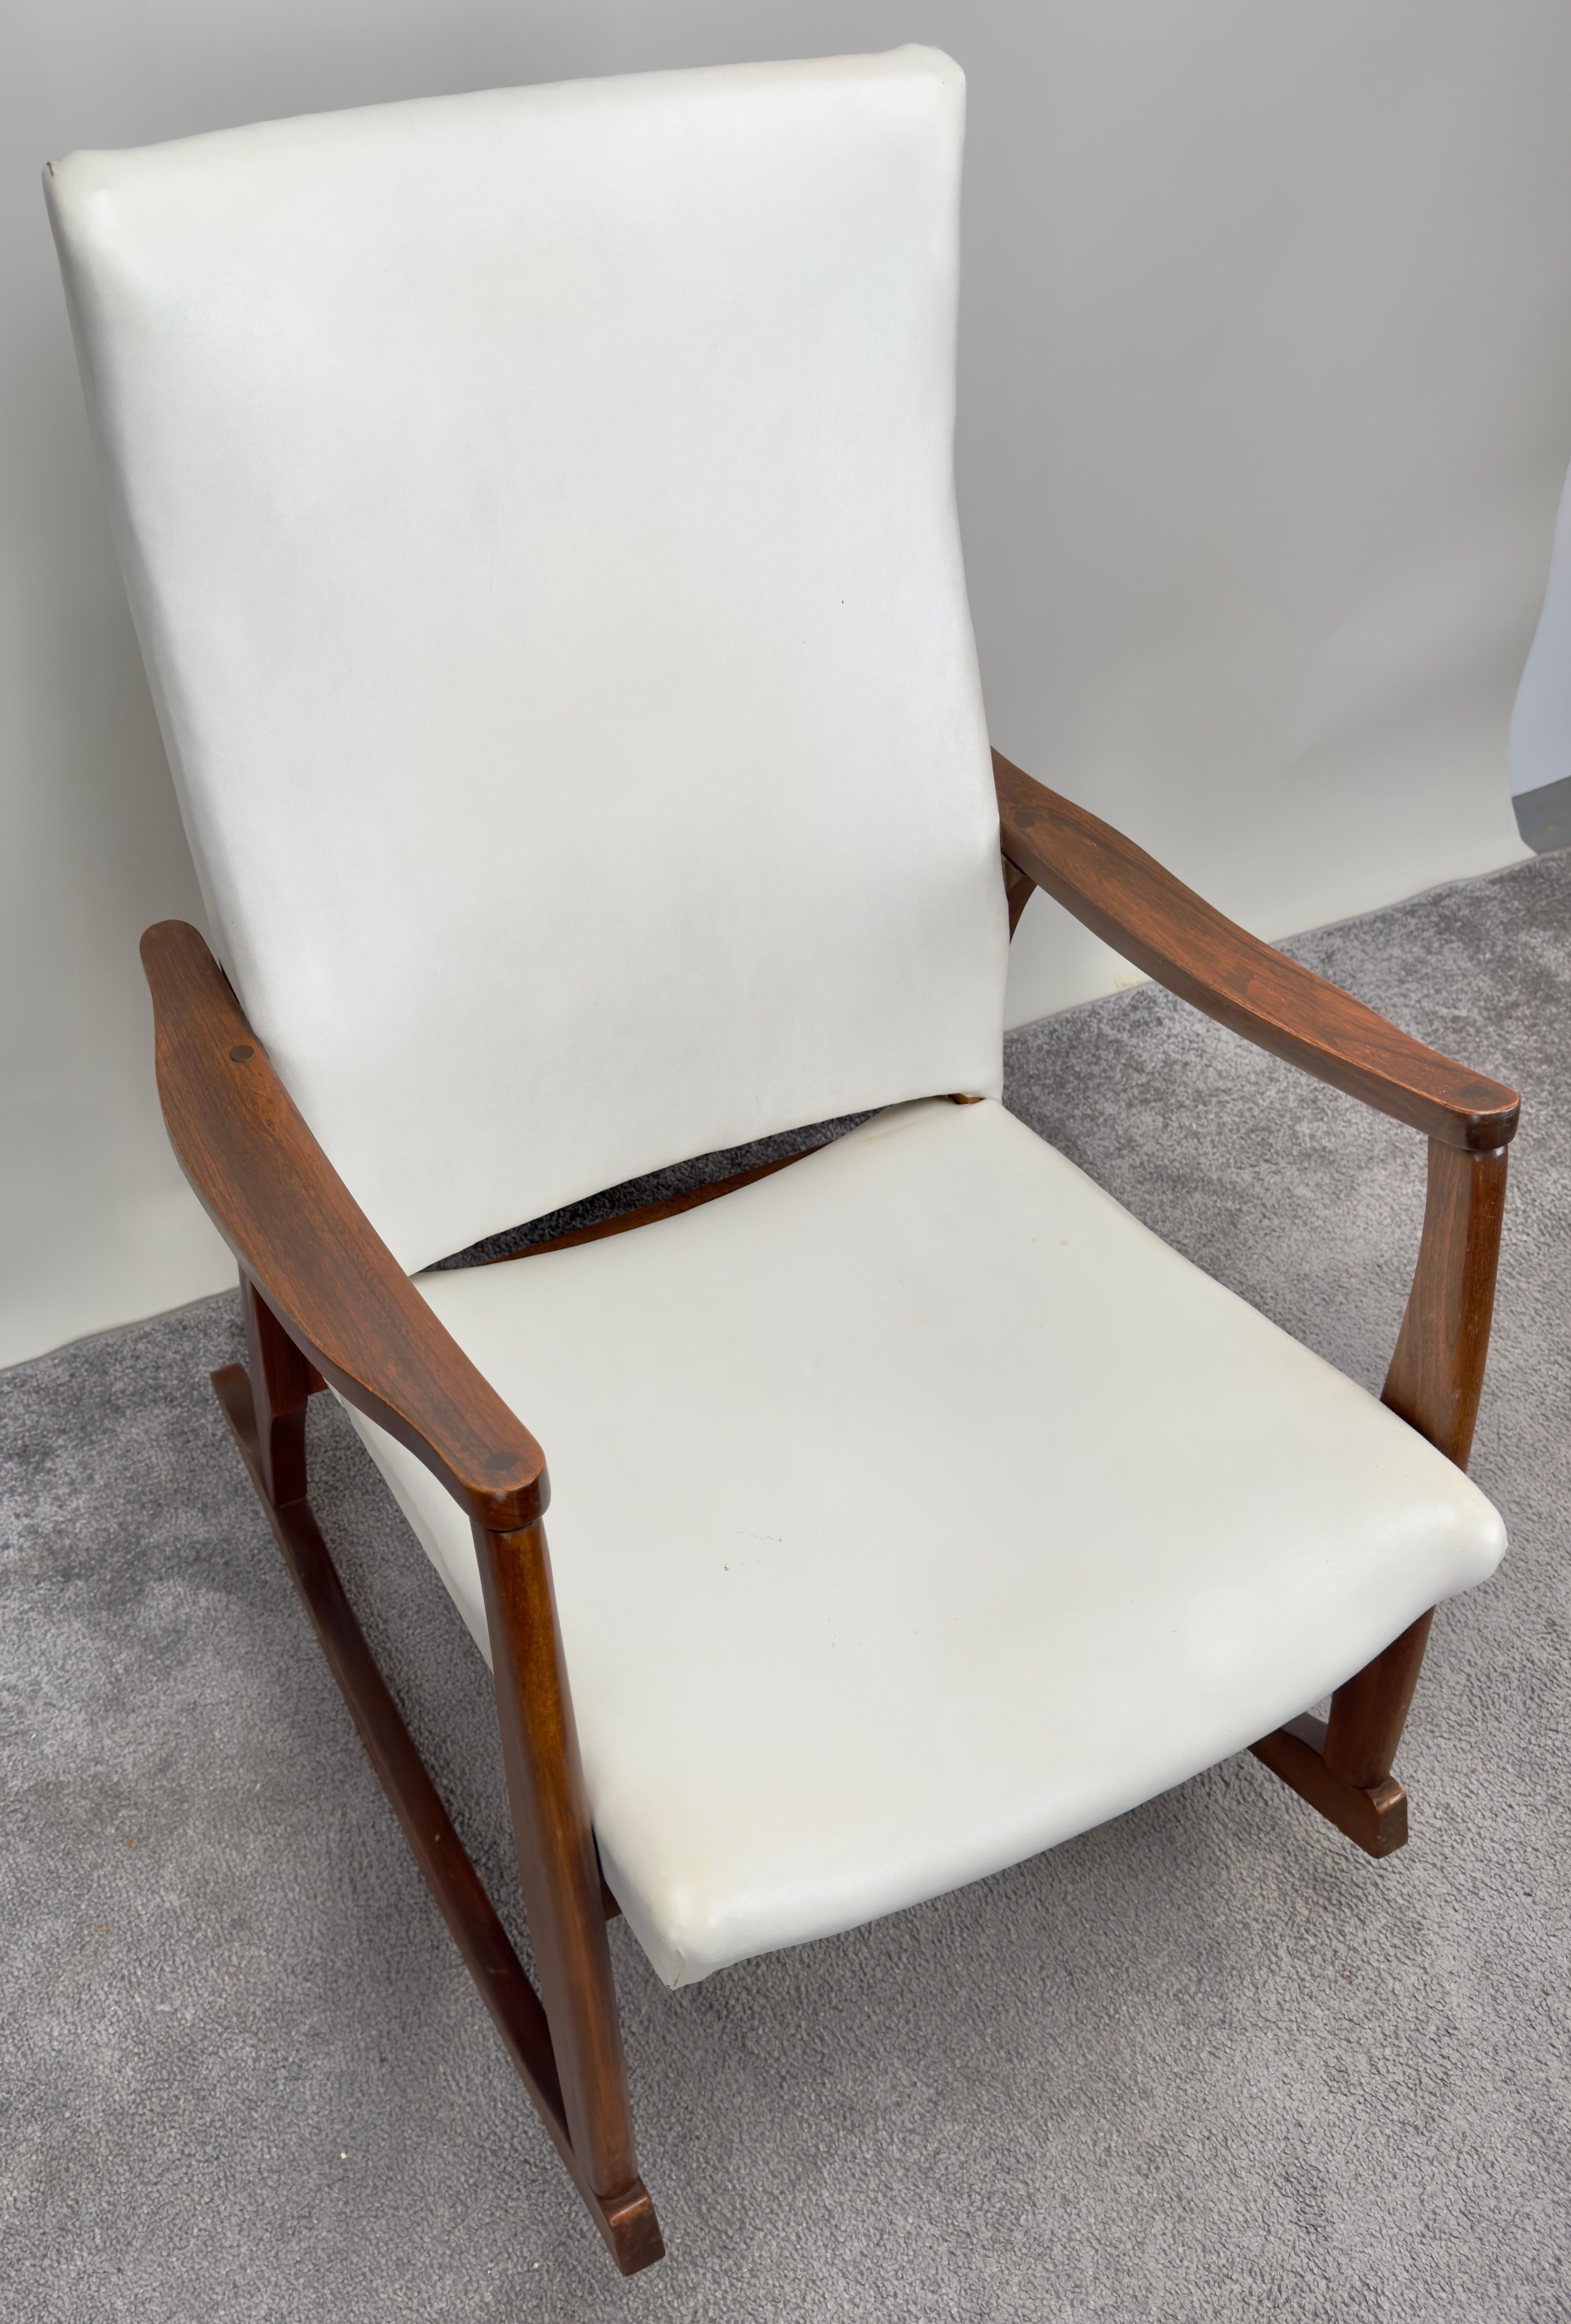 20th Century Mil Baughman Style MCM in White Faux Leather Rocking Chair  For Sale